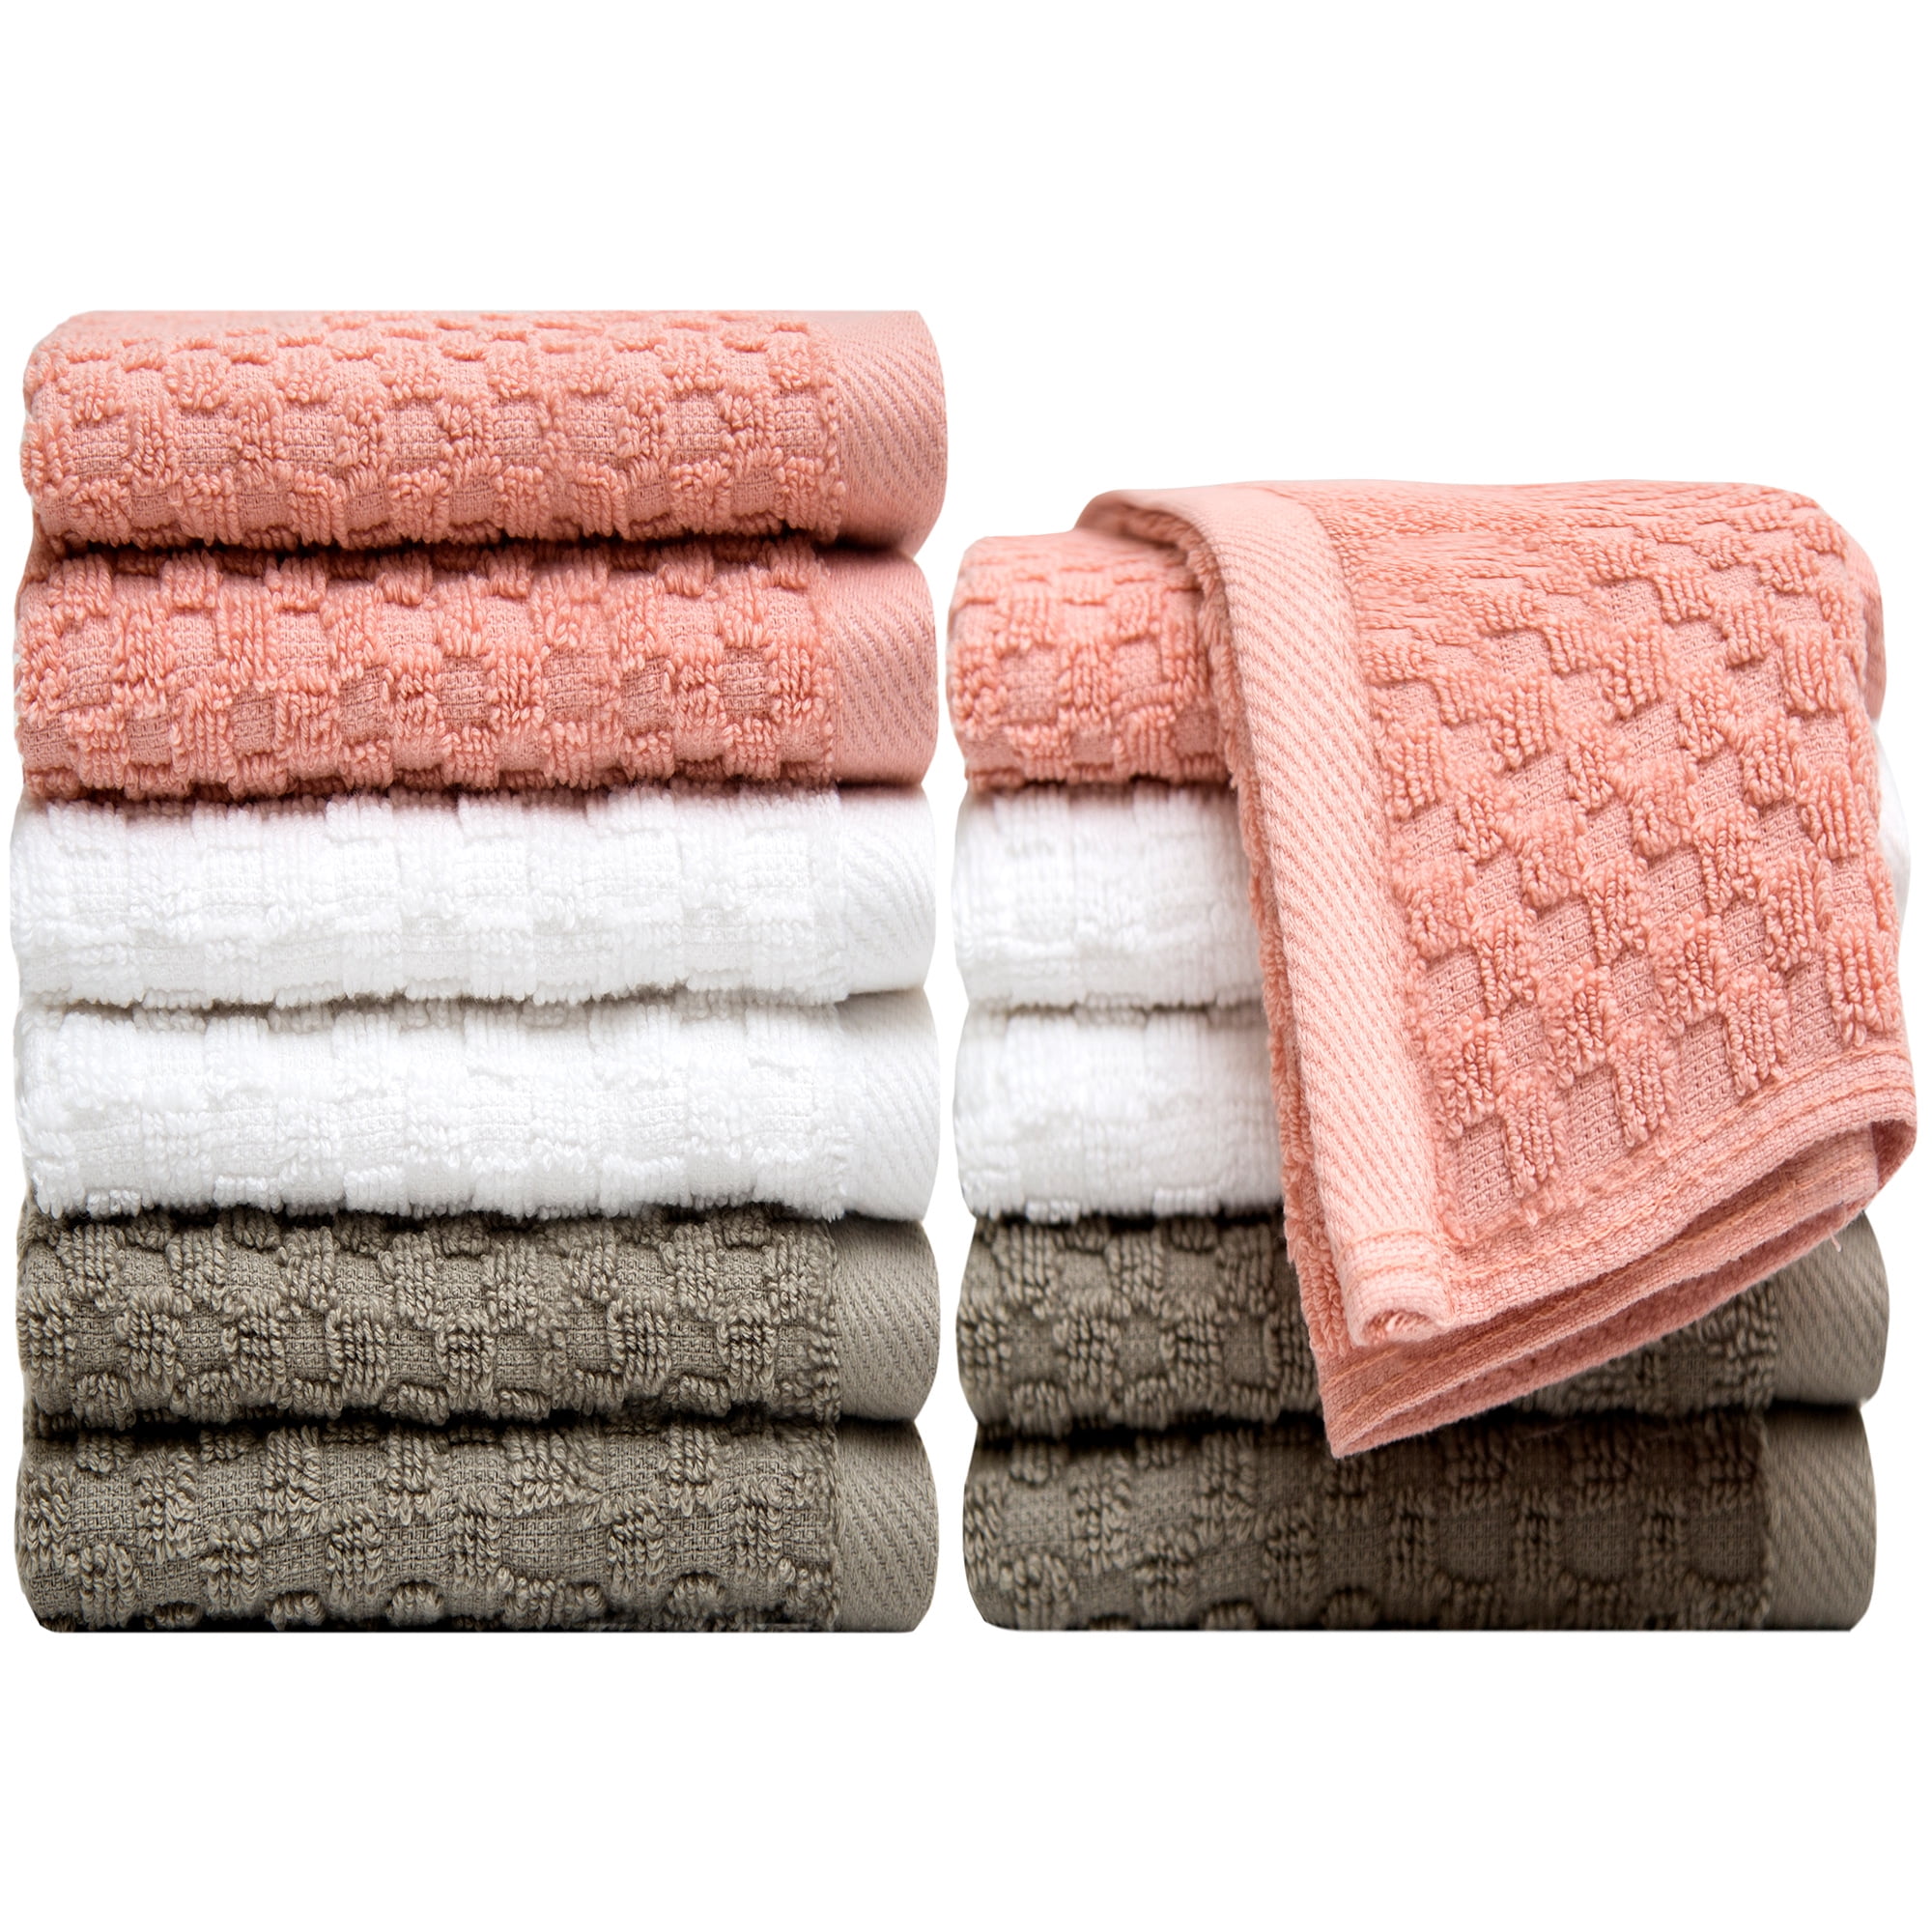 12 Pack washcloth Towel Set 100% Cotton Soft Luxury Wash Cloths for Face & Body